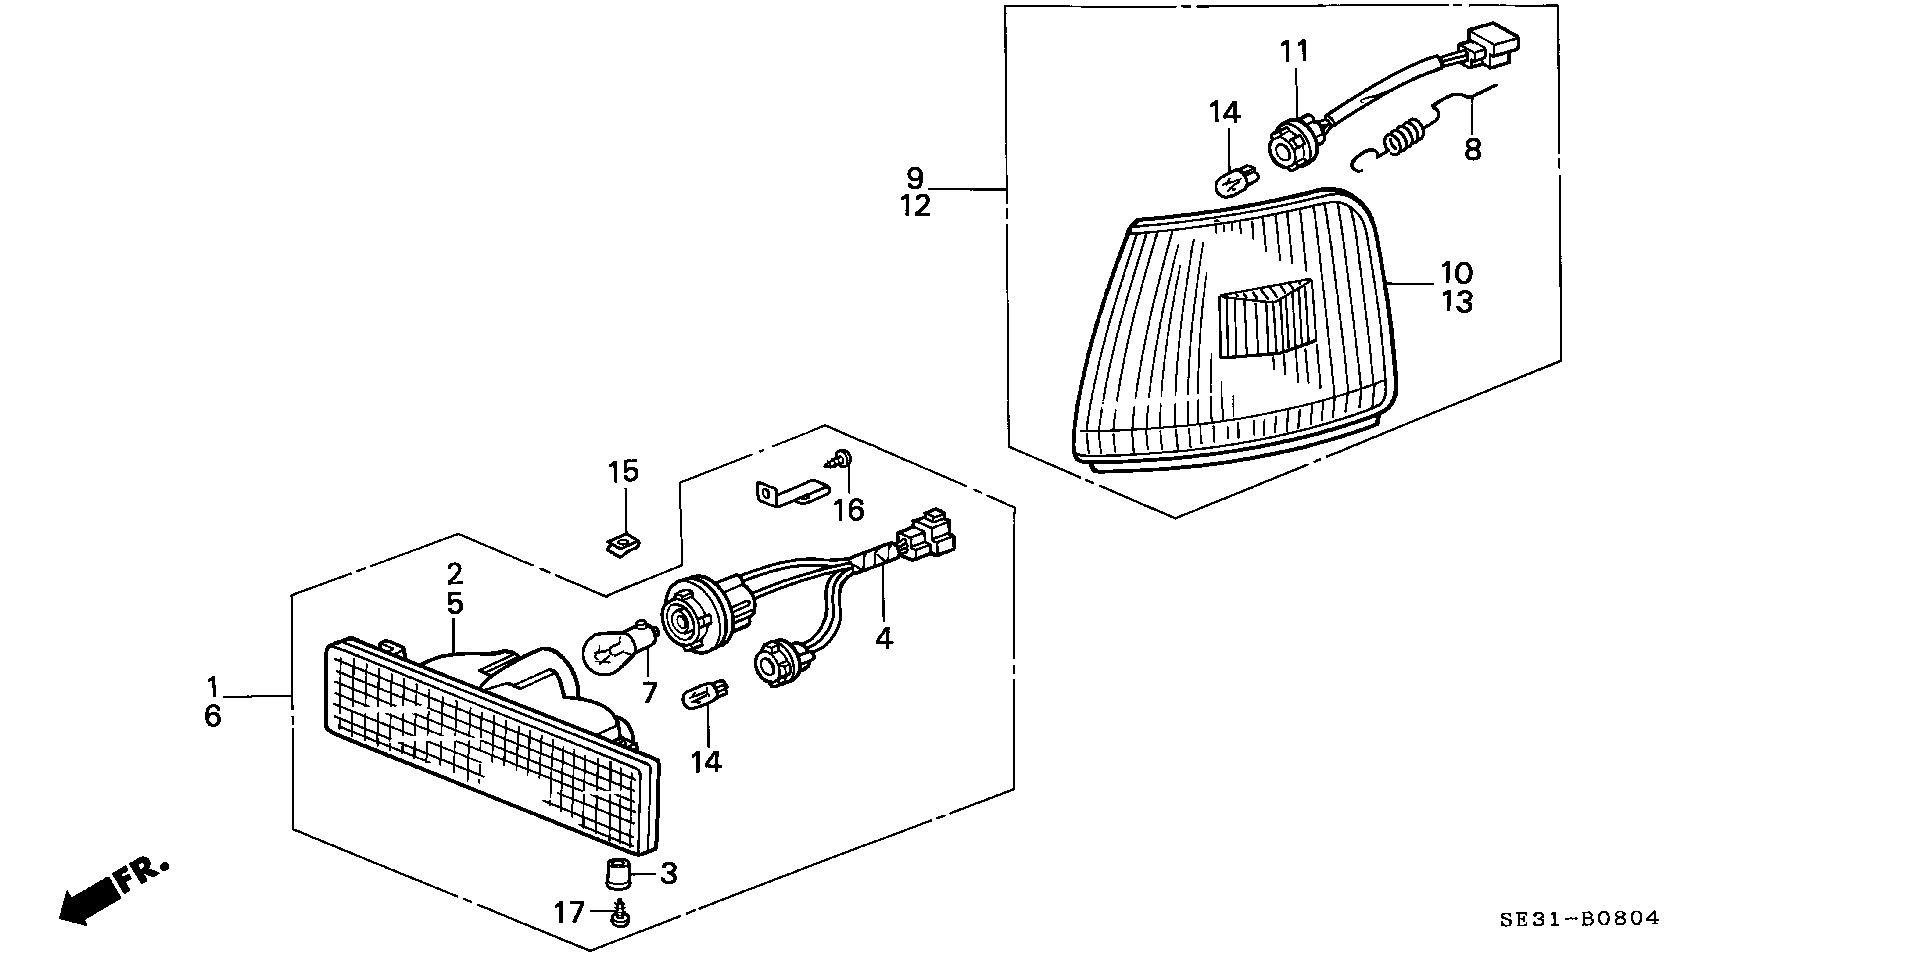 FRONT COMBINATION LIGHT(CA  FOR )